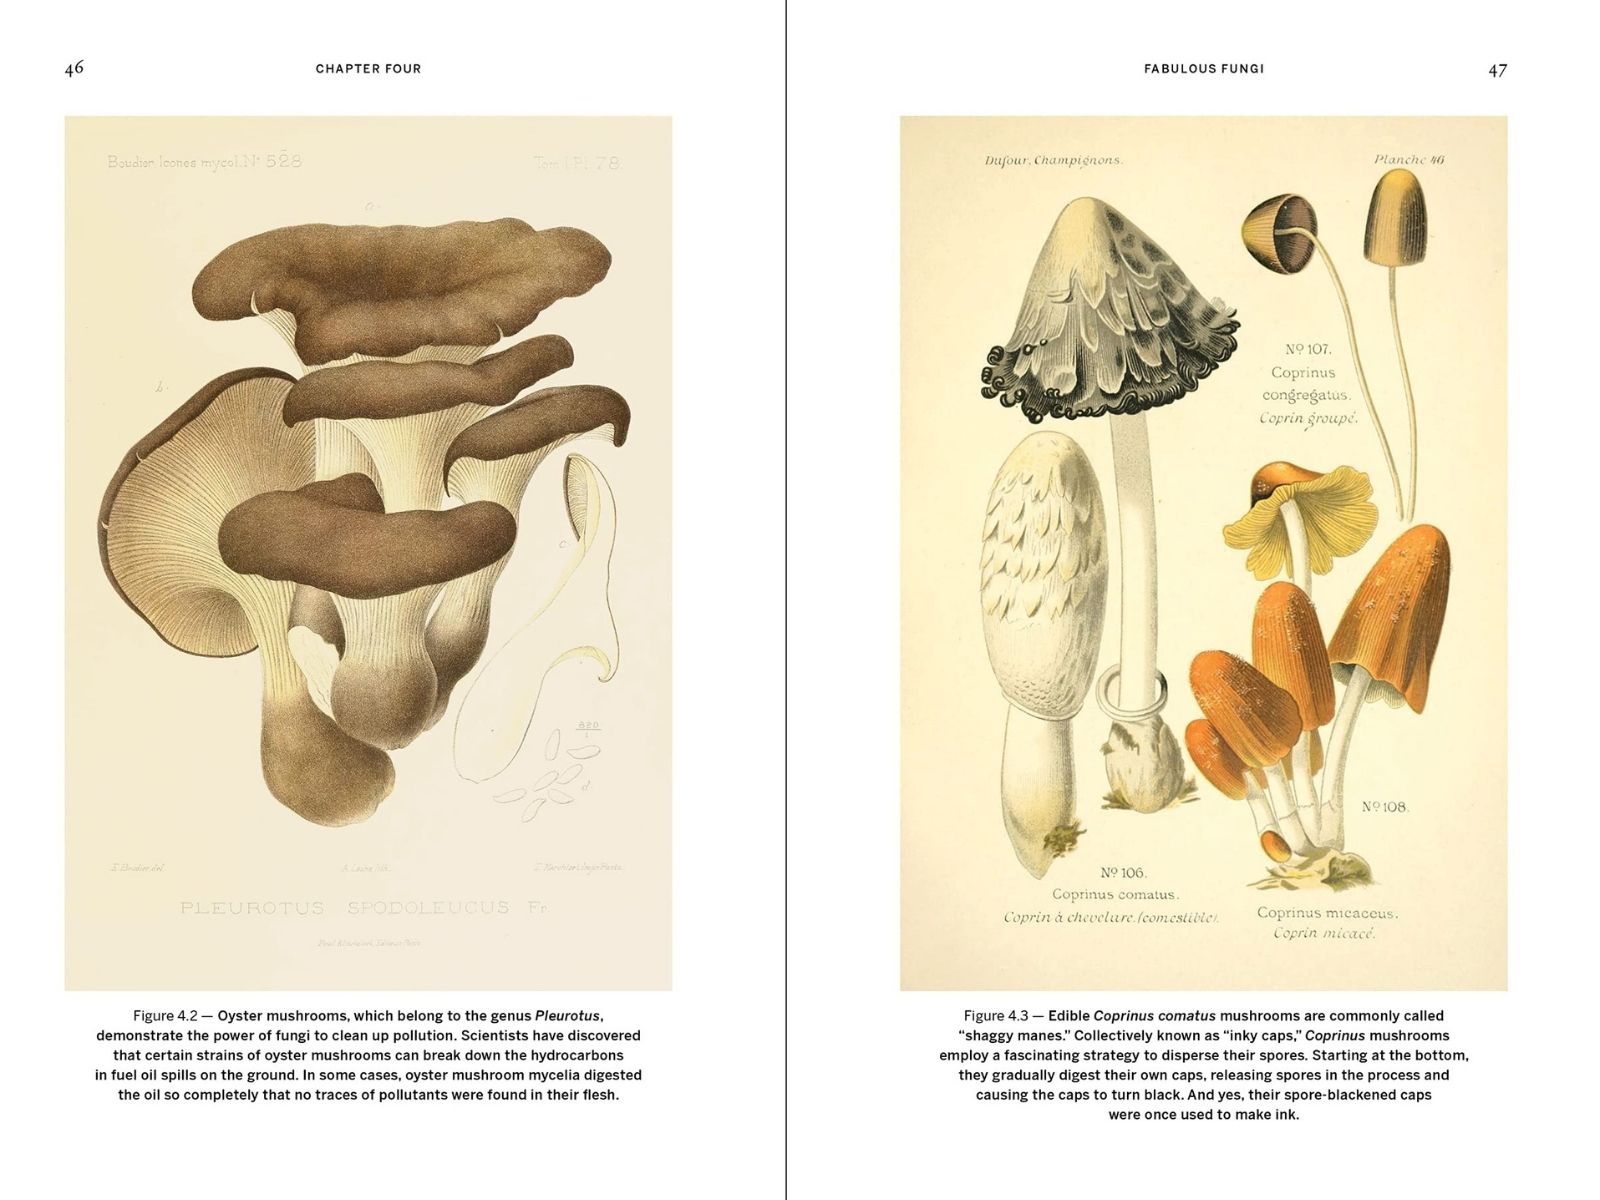 mushroom illustrations - wild design article - Lose Yourself in these Mesmerizing Vintage Illustrations of the Natural World - kimberley ridley on thursd